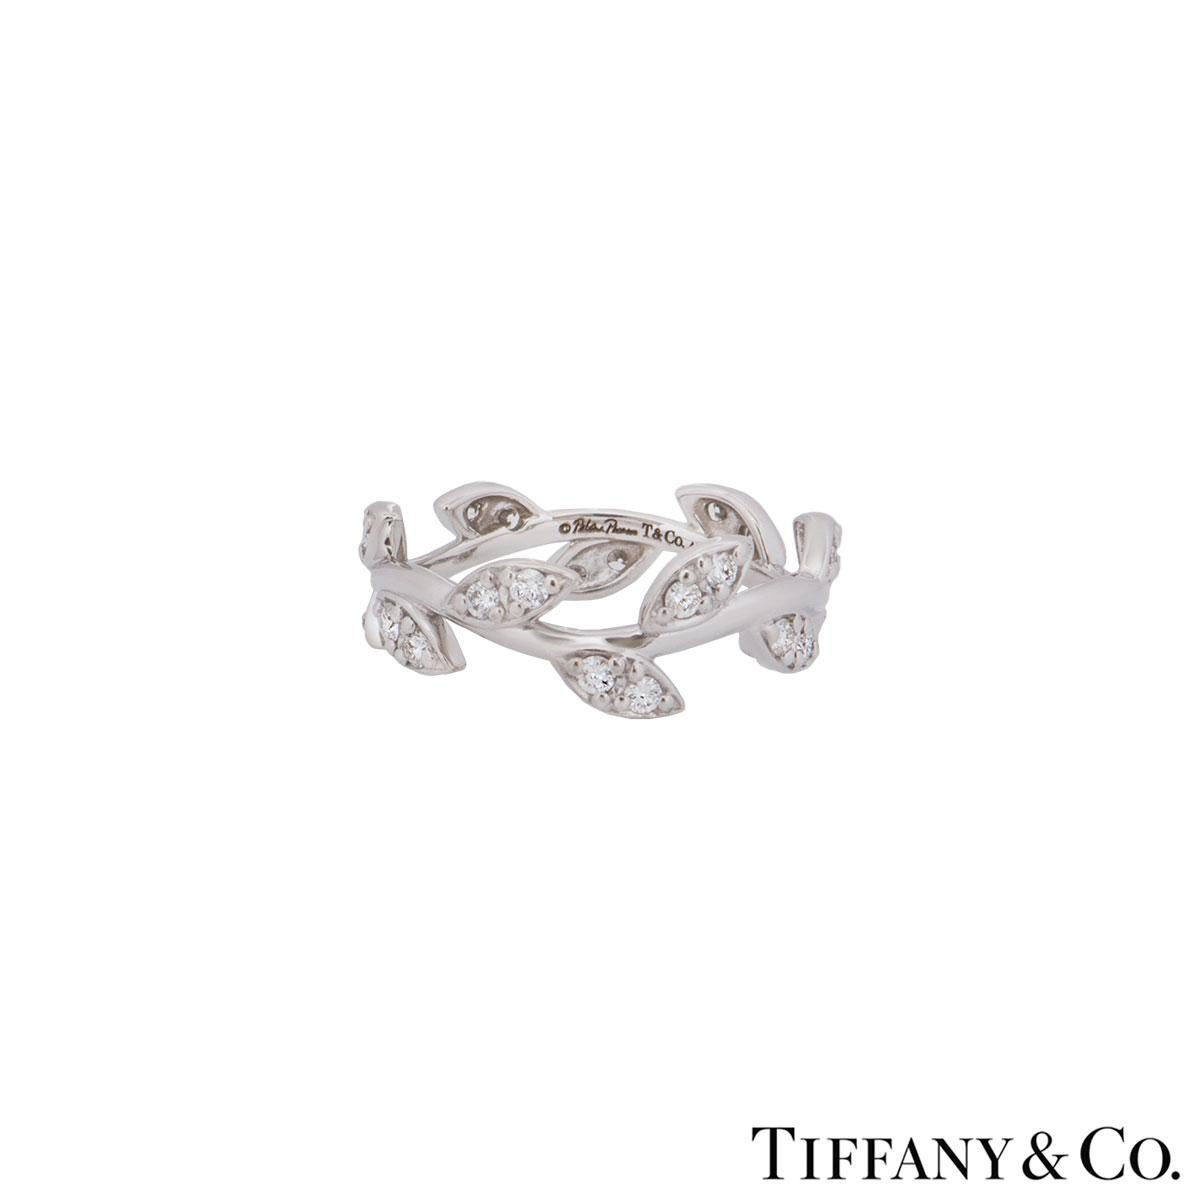 A stunning 18k white gold diamond leaf ring by Tiffany & Co. from the Paloma Picasso collection. The ring features a leaf design on a stem wrapped around pave set with round brilliant cut diamonds 0.28ct. The ring has a width of 4.00mm and is a UK